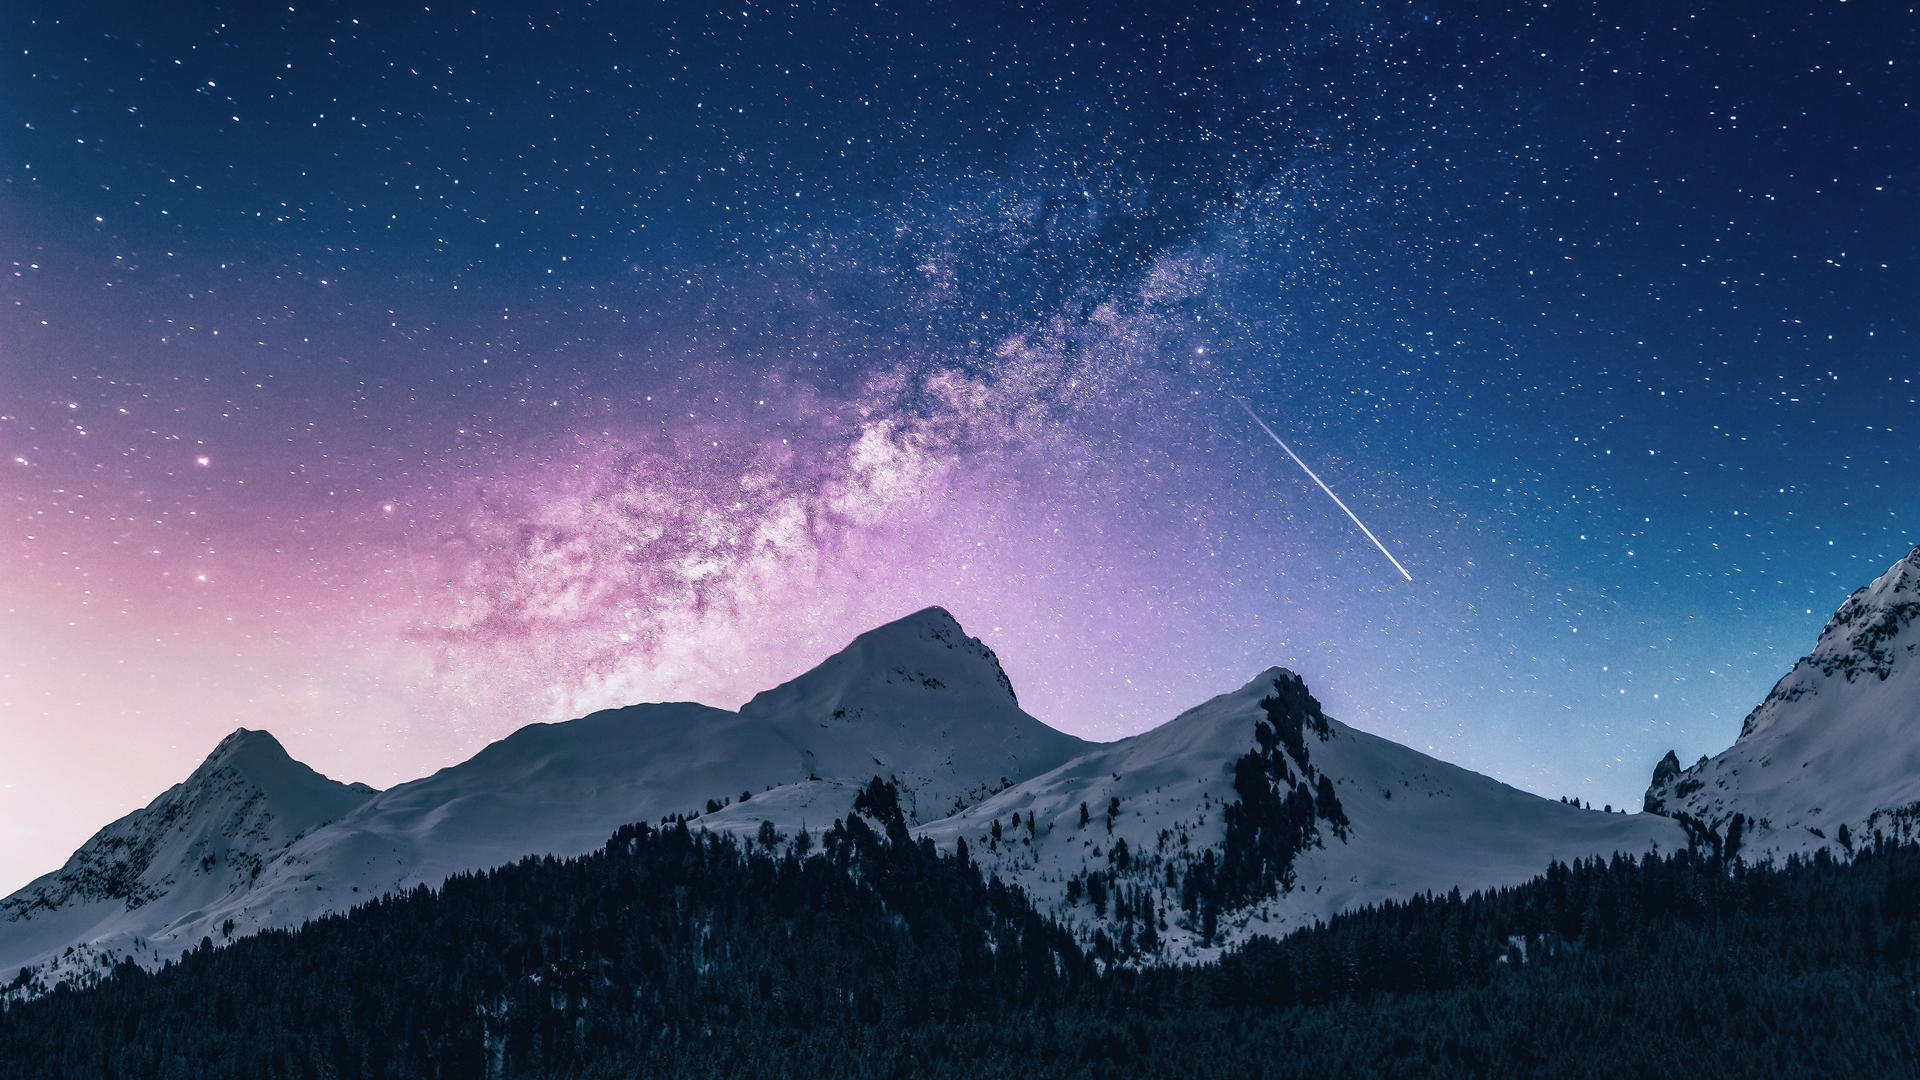 General 1920x1080 nature Milky Way stars landscape sky mountains